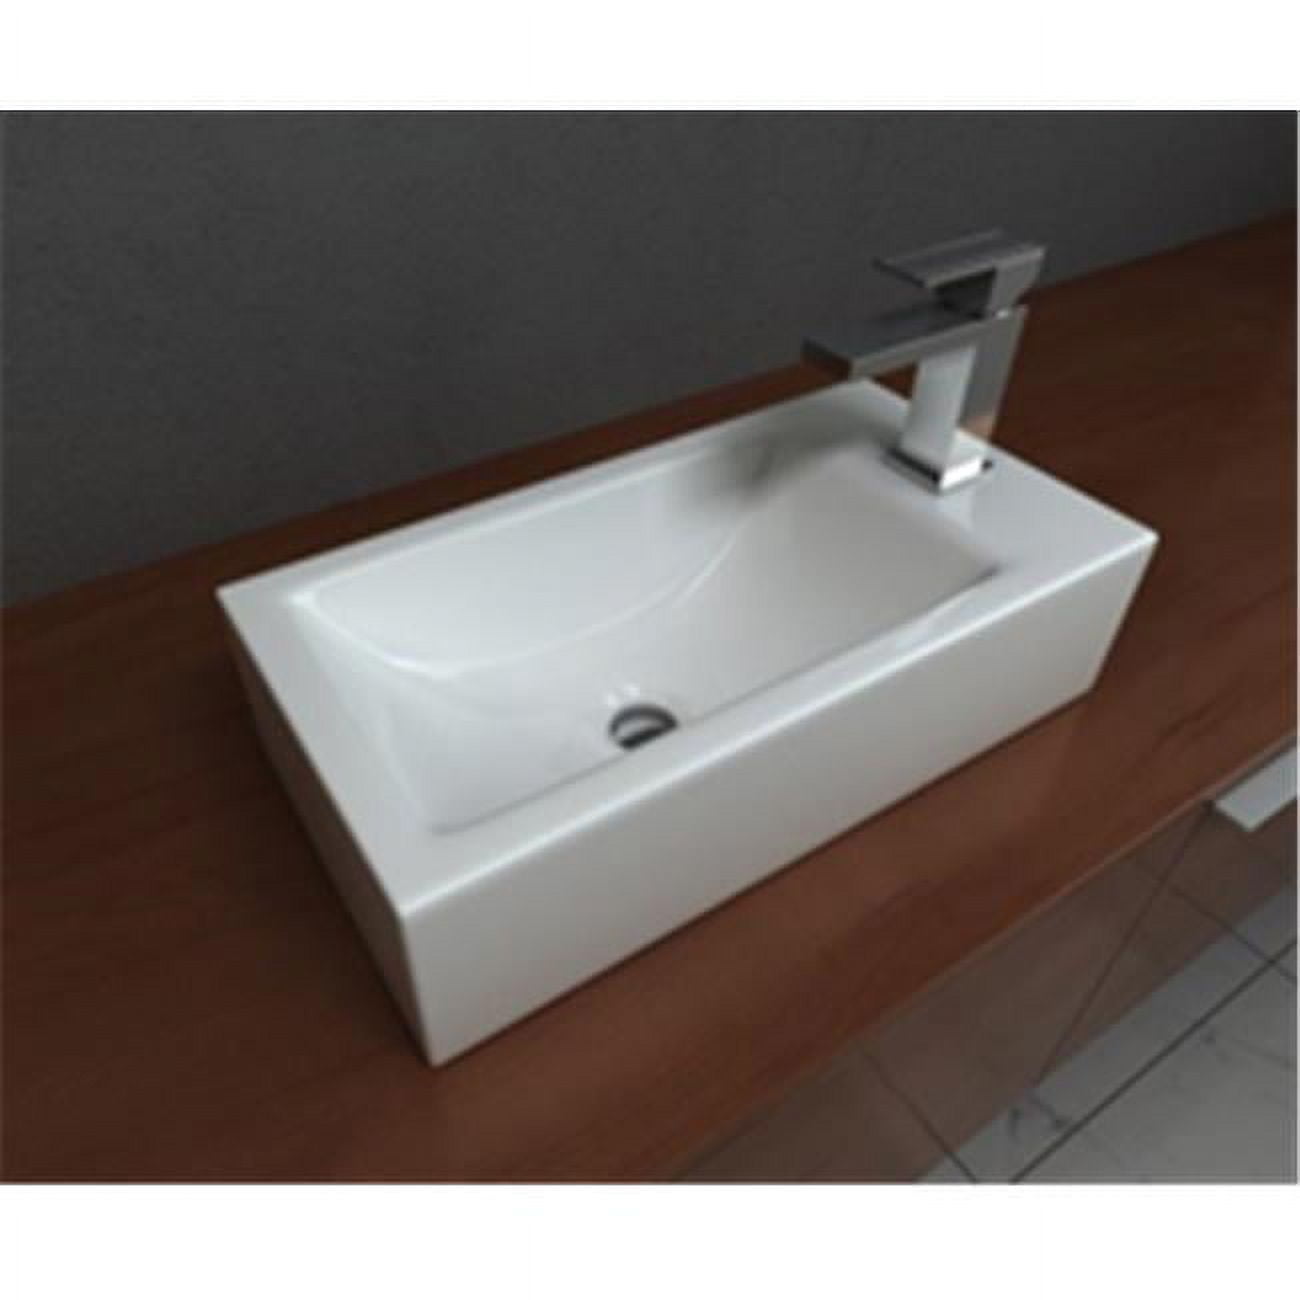 Picture of Cantrio Koncepts PS-020 Vitreous Chinda Counter Top Sink, White